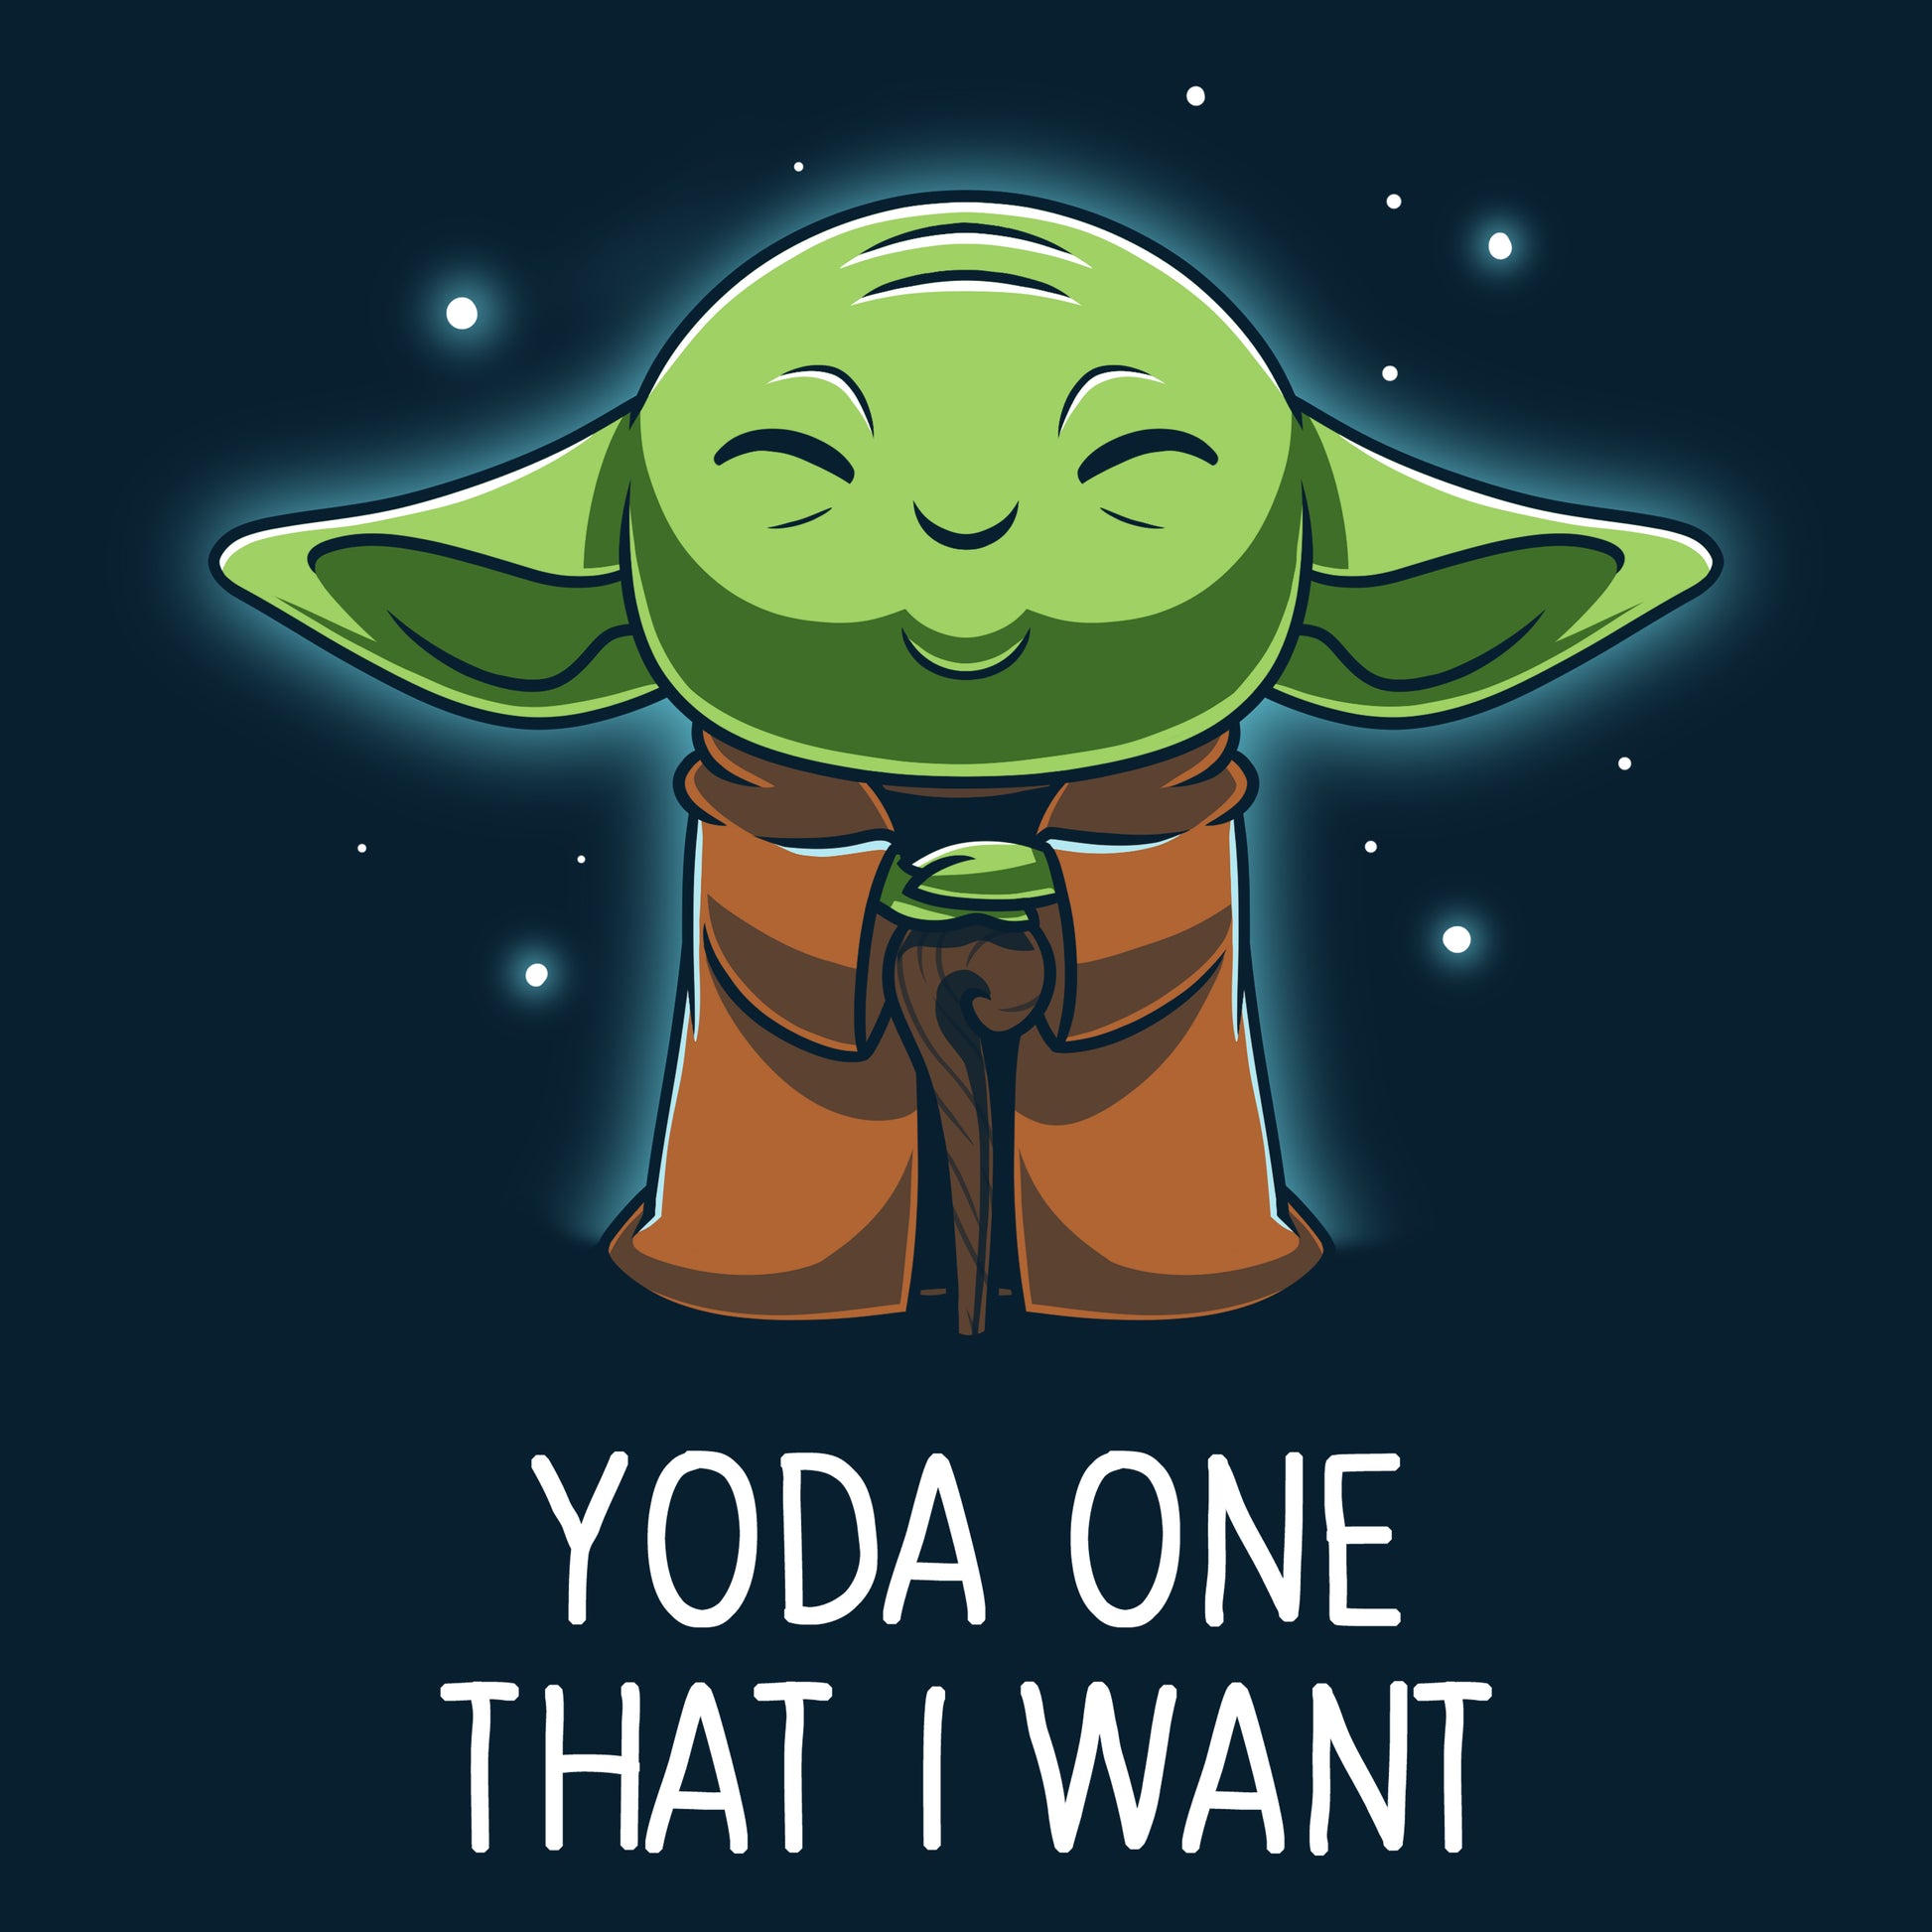 Star Wars-inspired T-shirt featuring Yoda One That I Want by Star Wars.